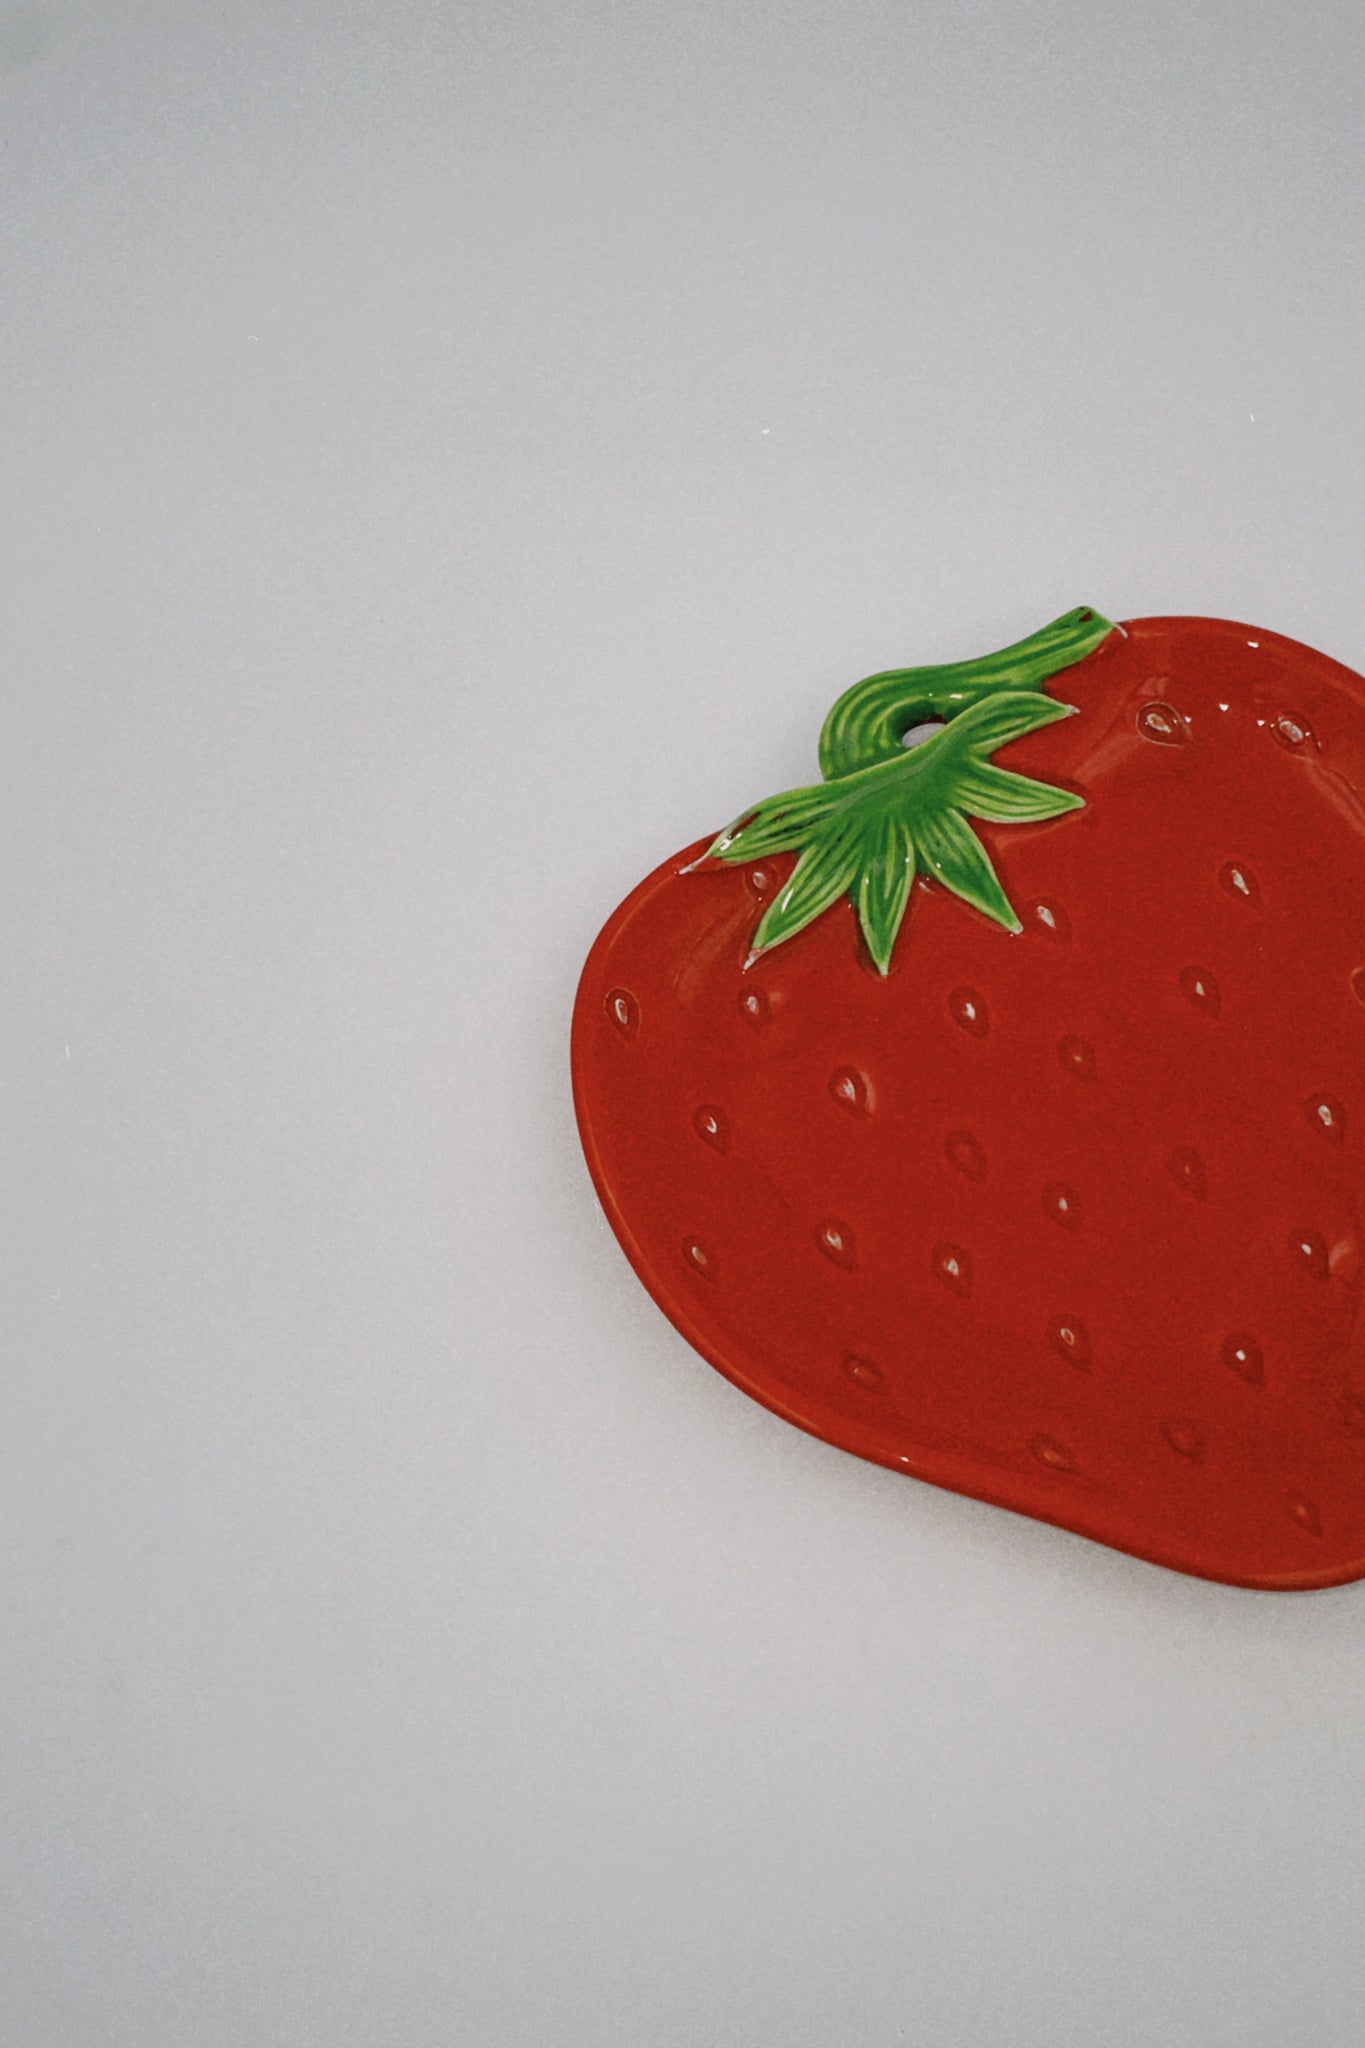 Strawberry Ceramic Plate and Bowl